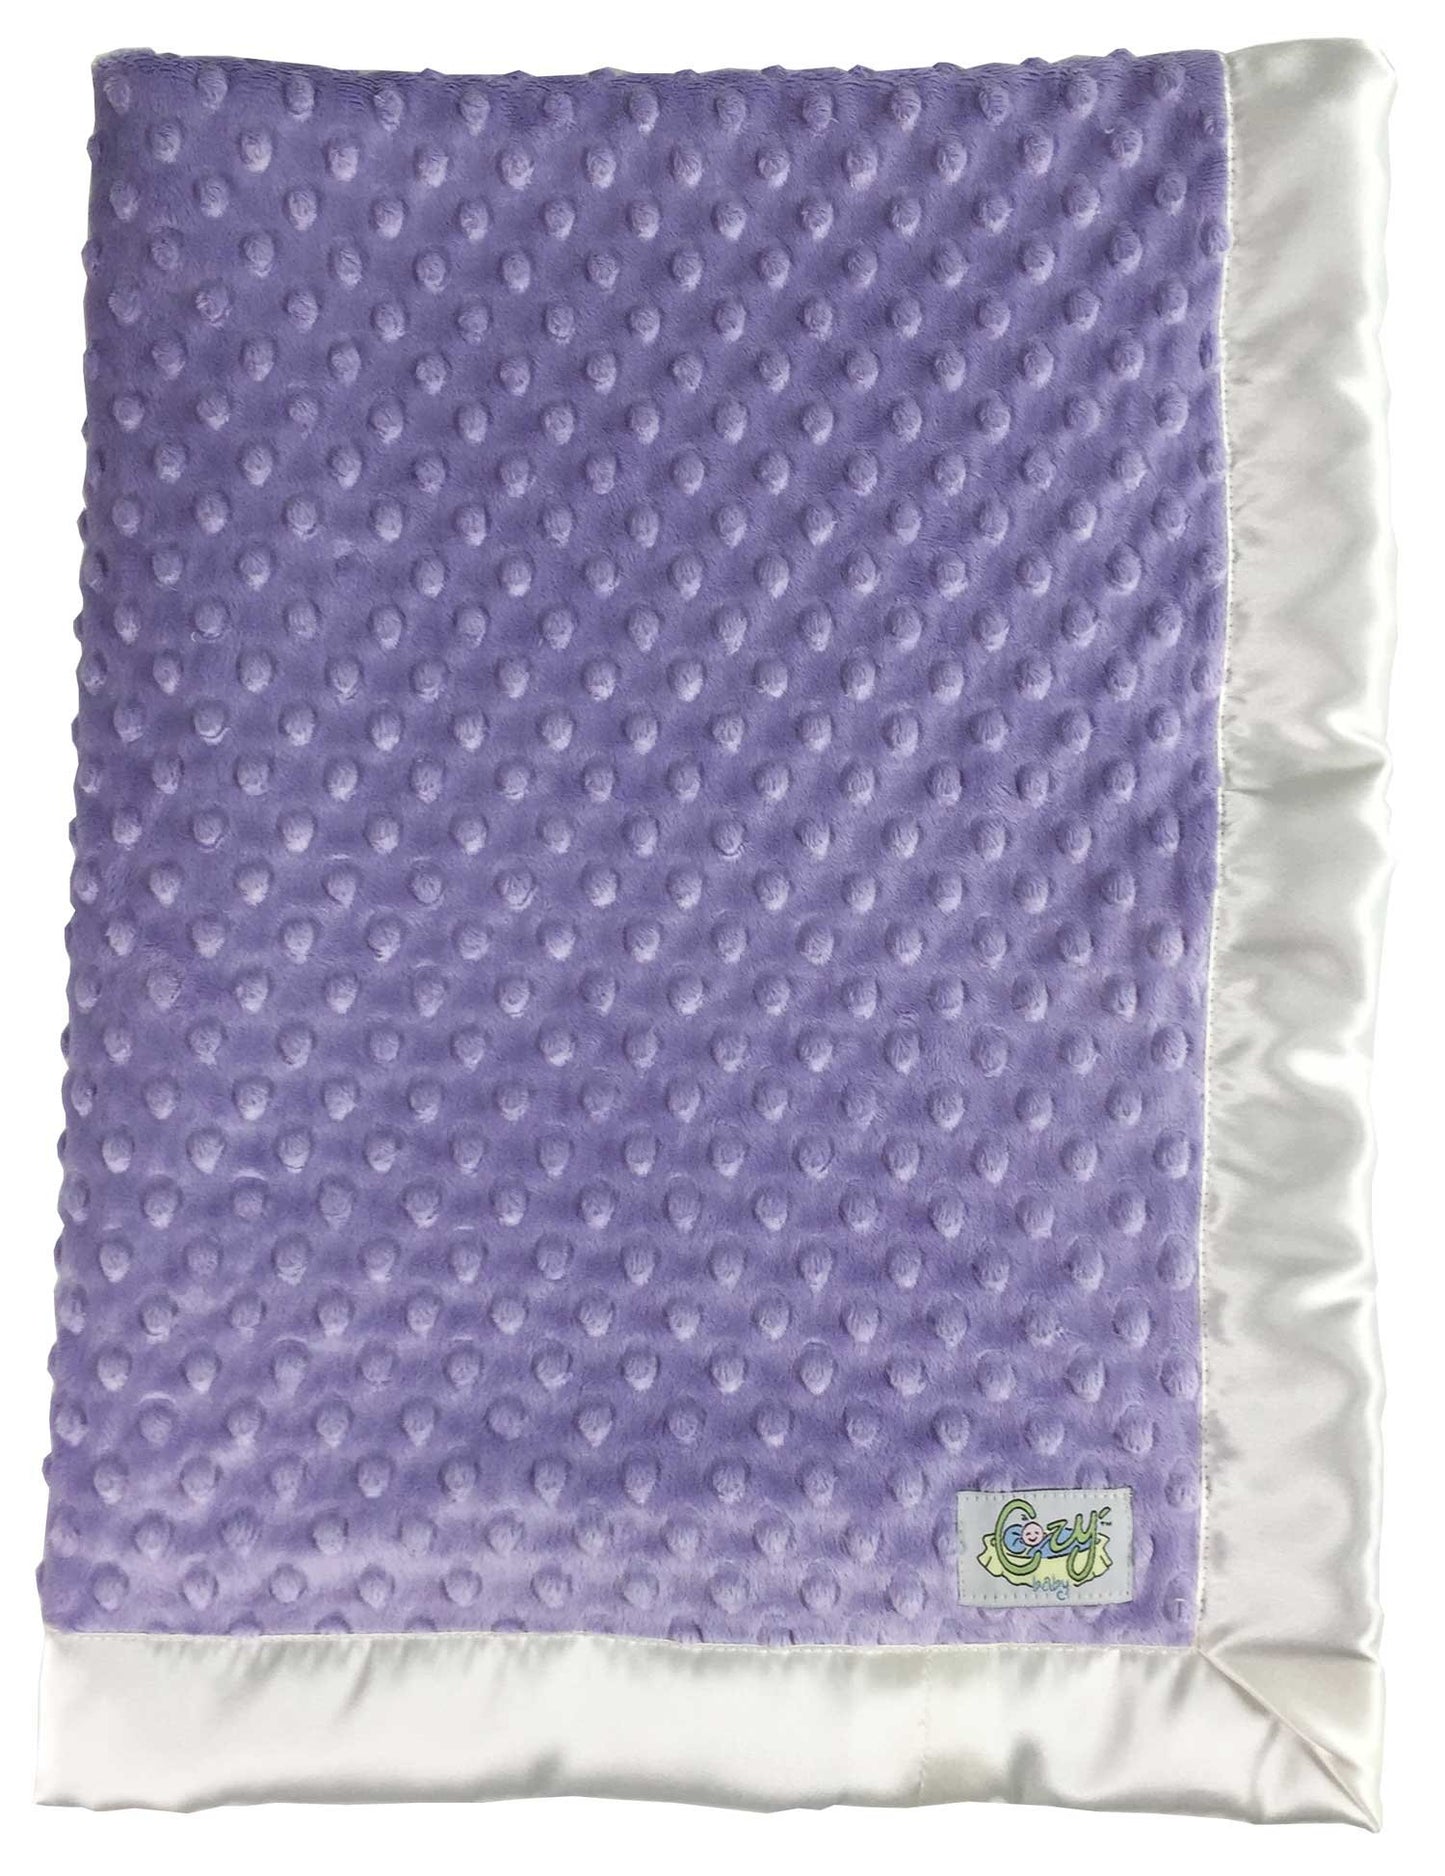 Minky Dot Baby Blanket with 2 inch Satin Edging